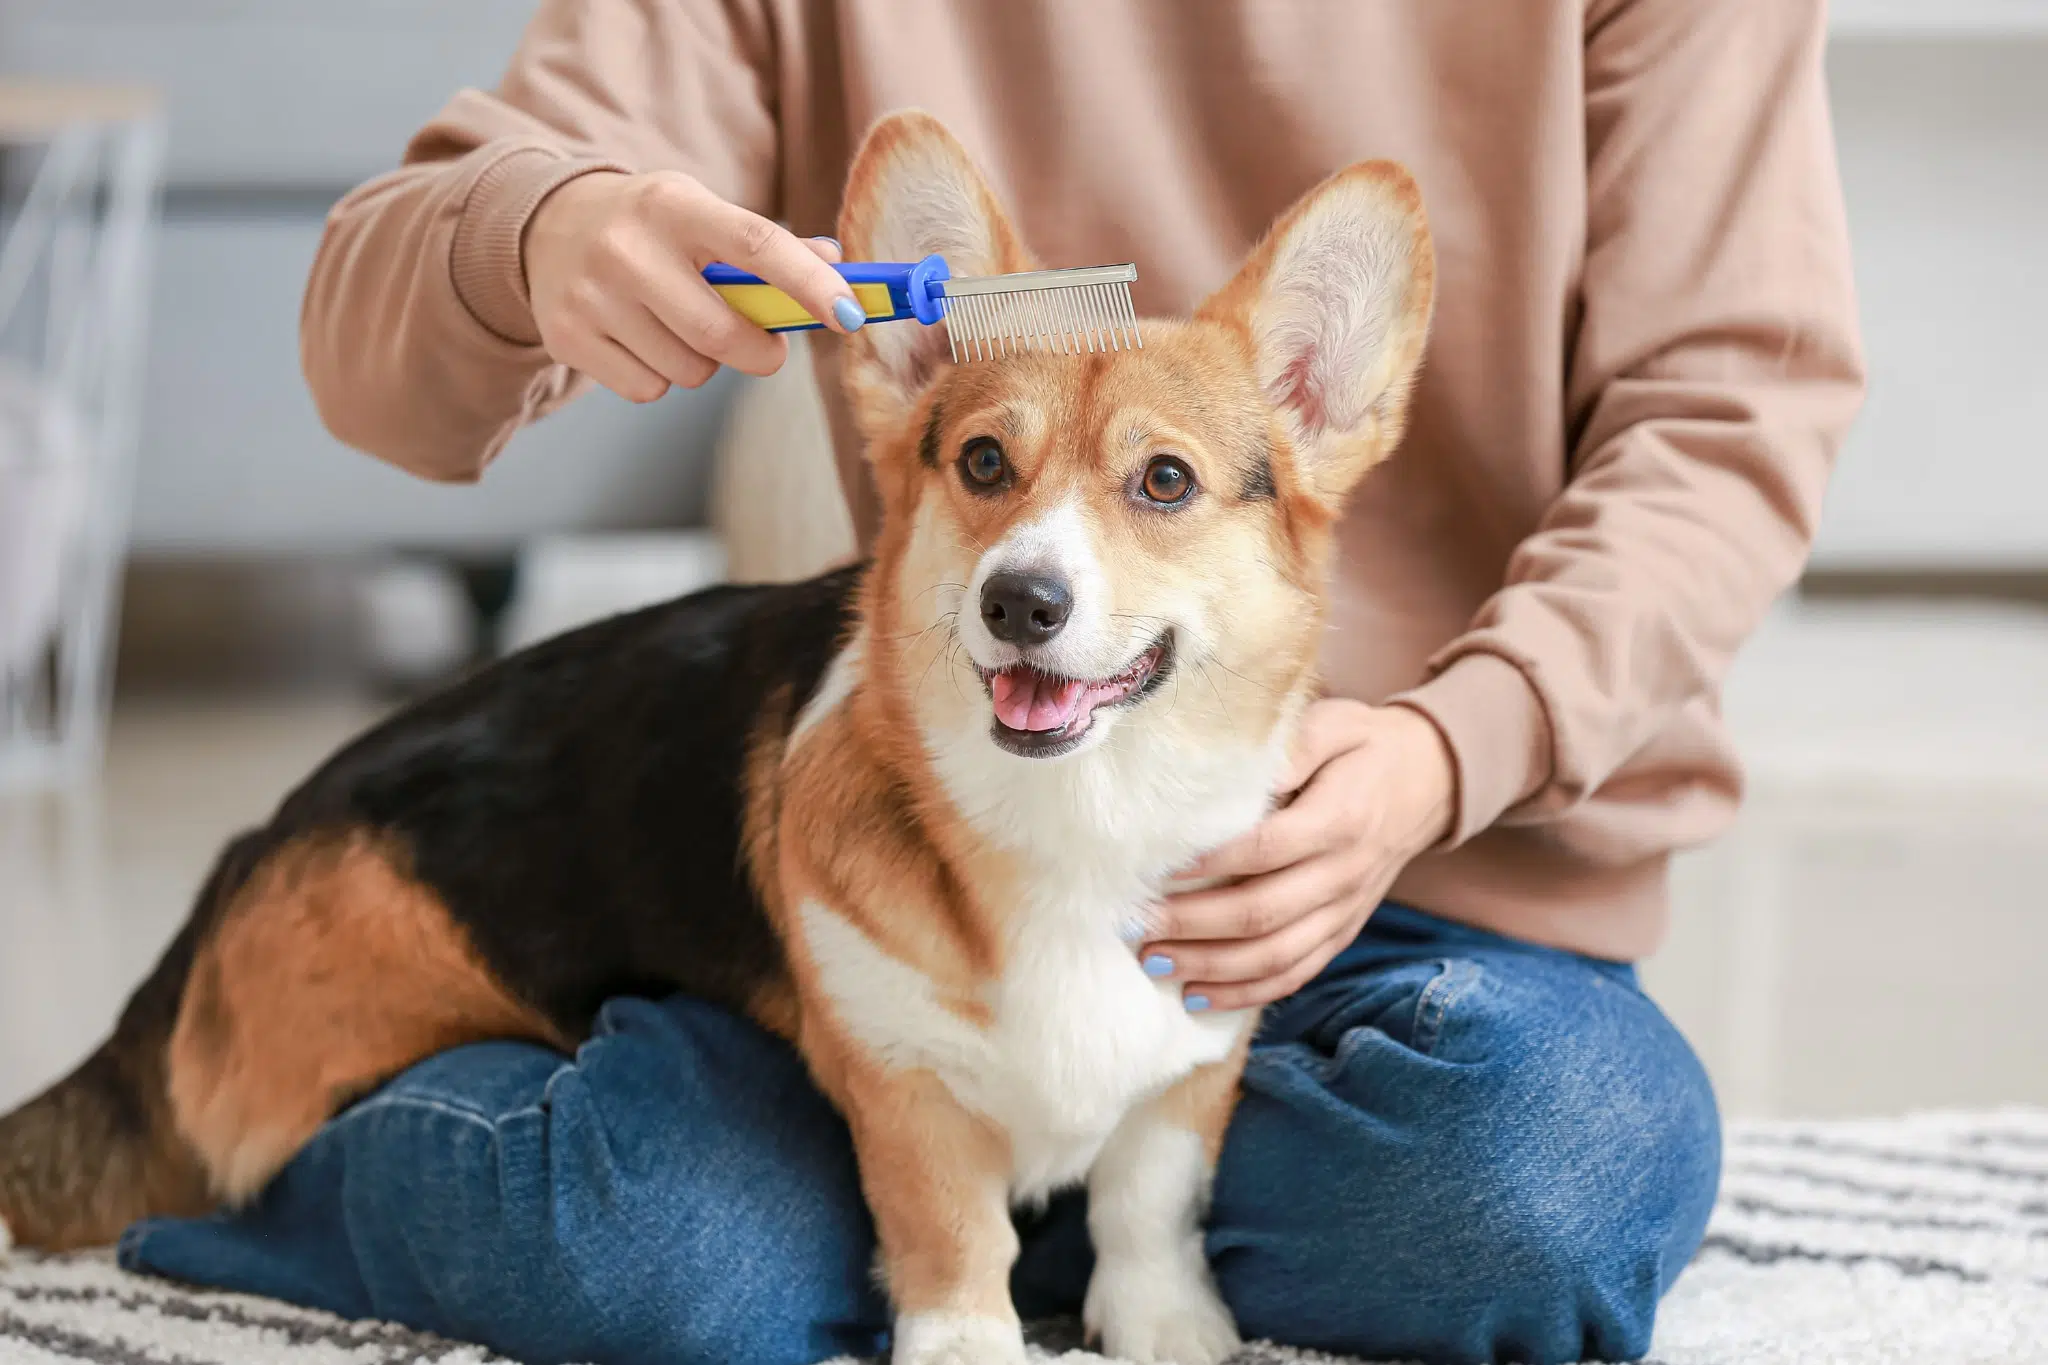 A dog being groomed at home